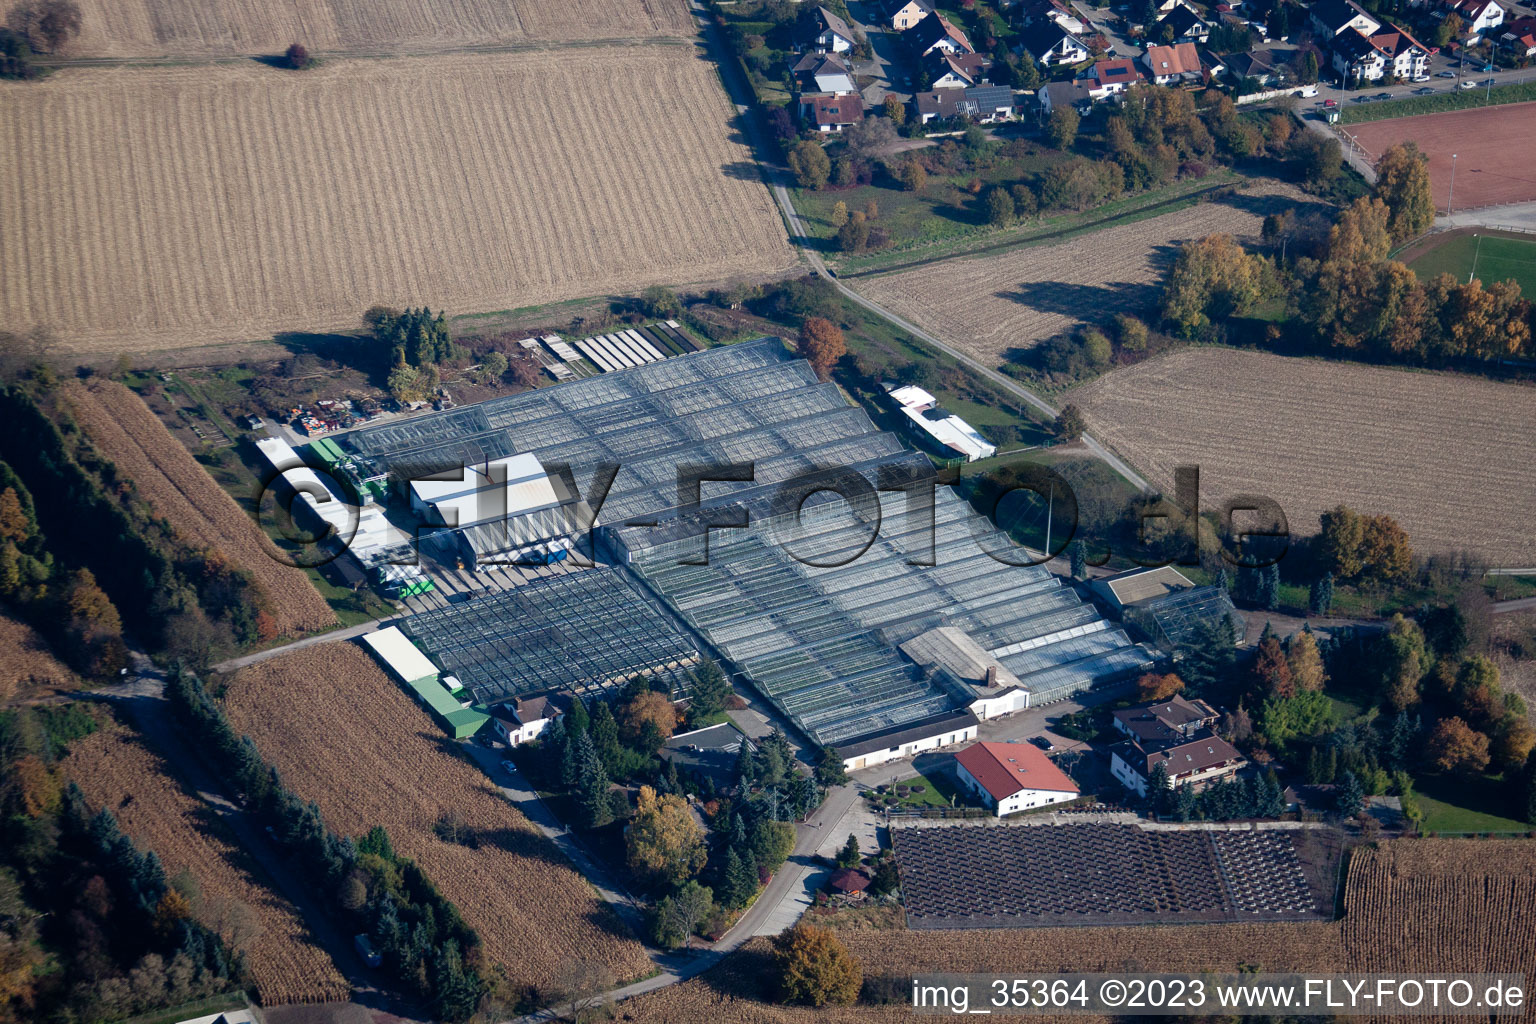 Drone image of Geranium Endisch GmbH in Hagenbach in the state Rhineland-Palatinate, Germany